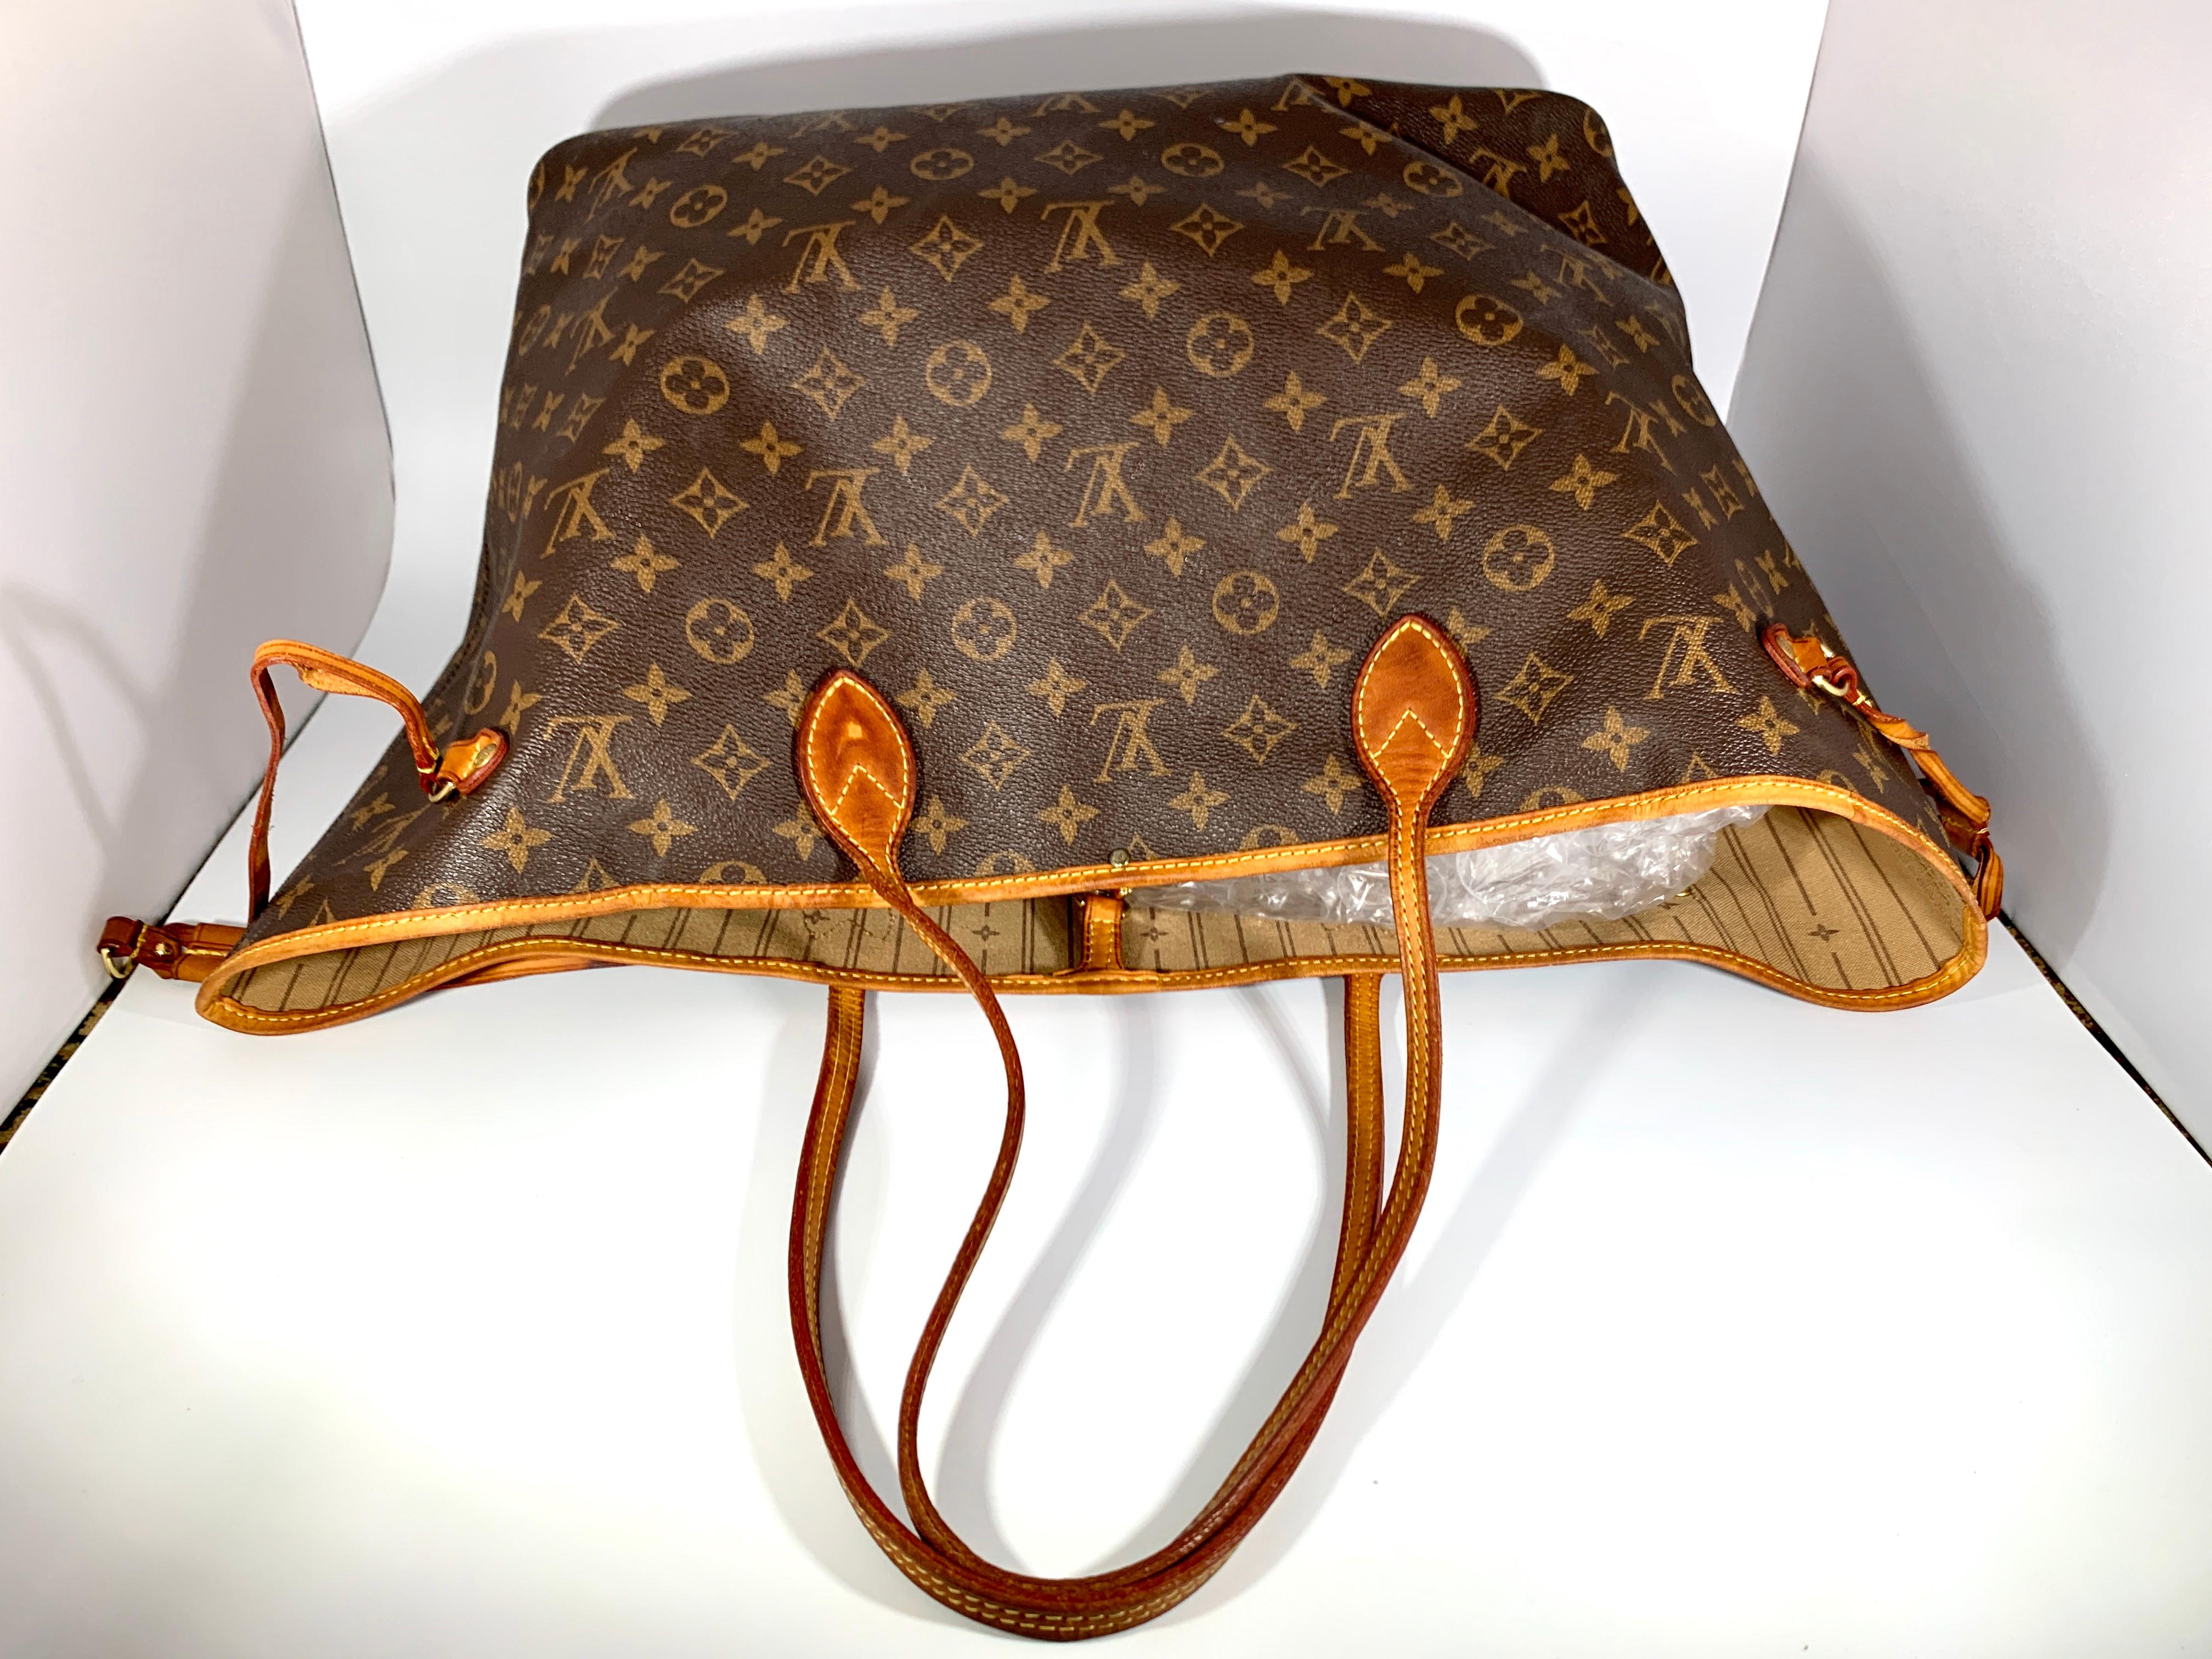 LOUIS VUITTON Brown Monogram Neverfull With a pouch, Canvas MM Tote Beige 2